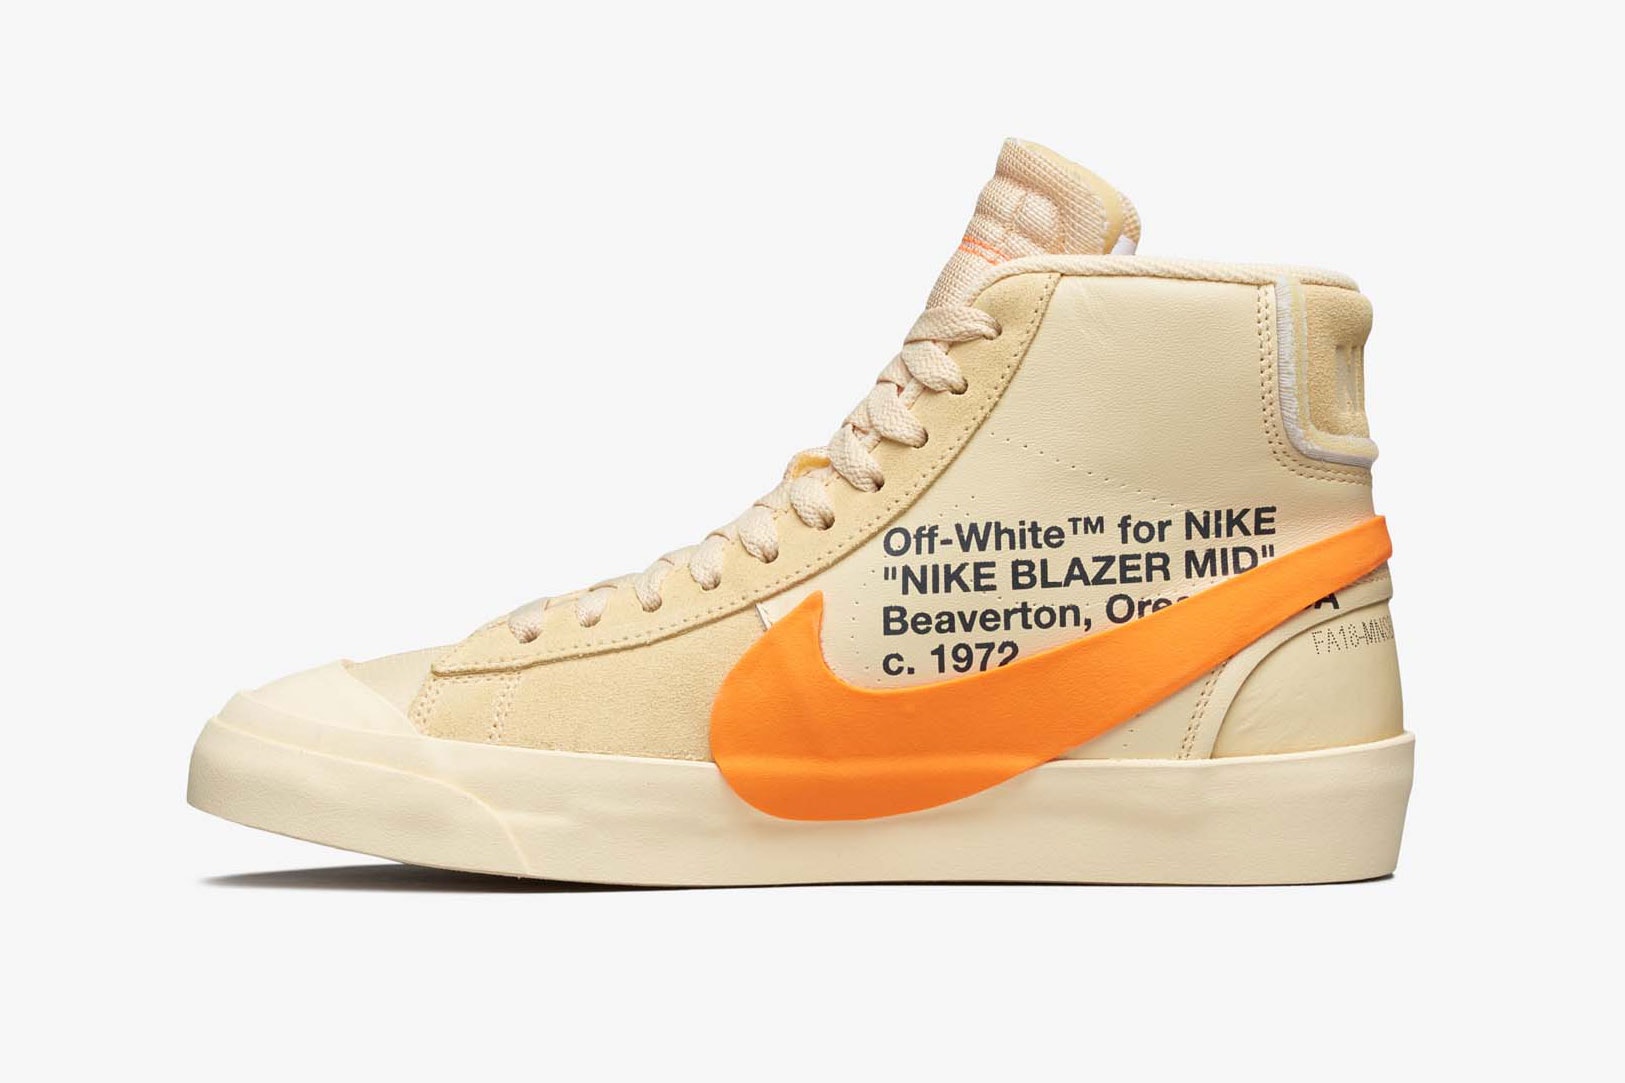 Off White Nike Blazer Spooky Pack Official Pics grim reaper All Hallows Eve leak release date drop virgil abloh collaboration